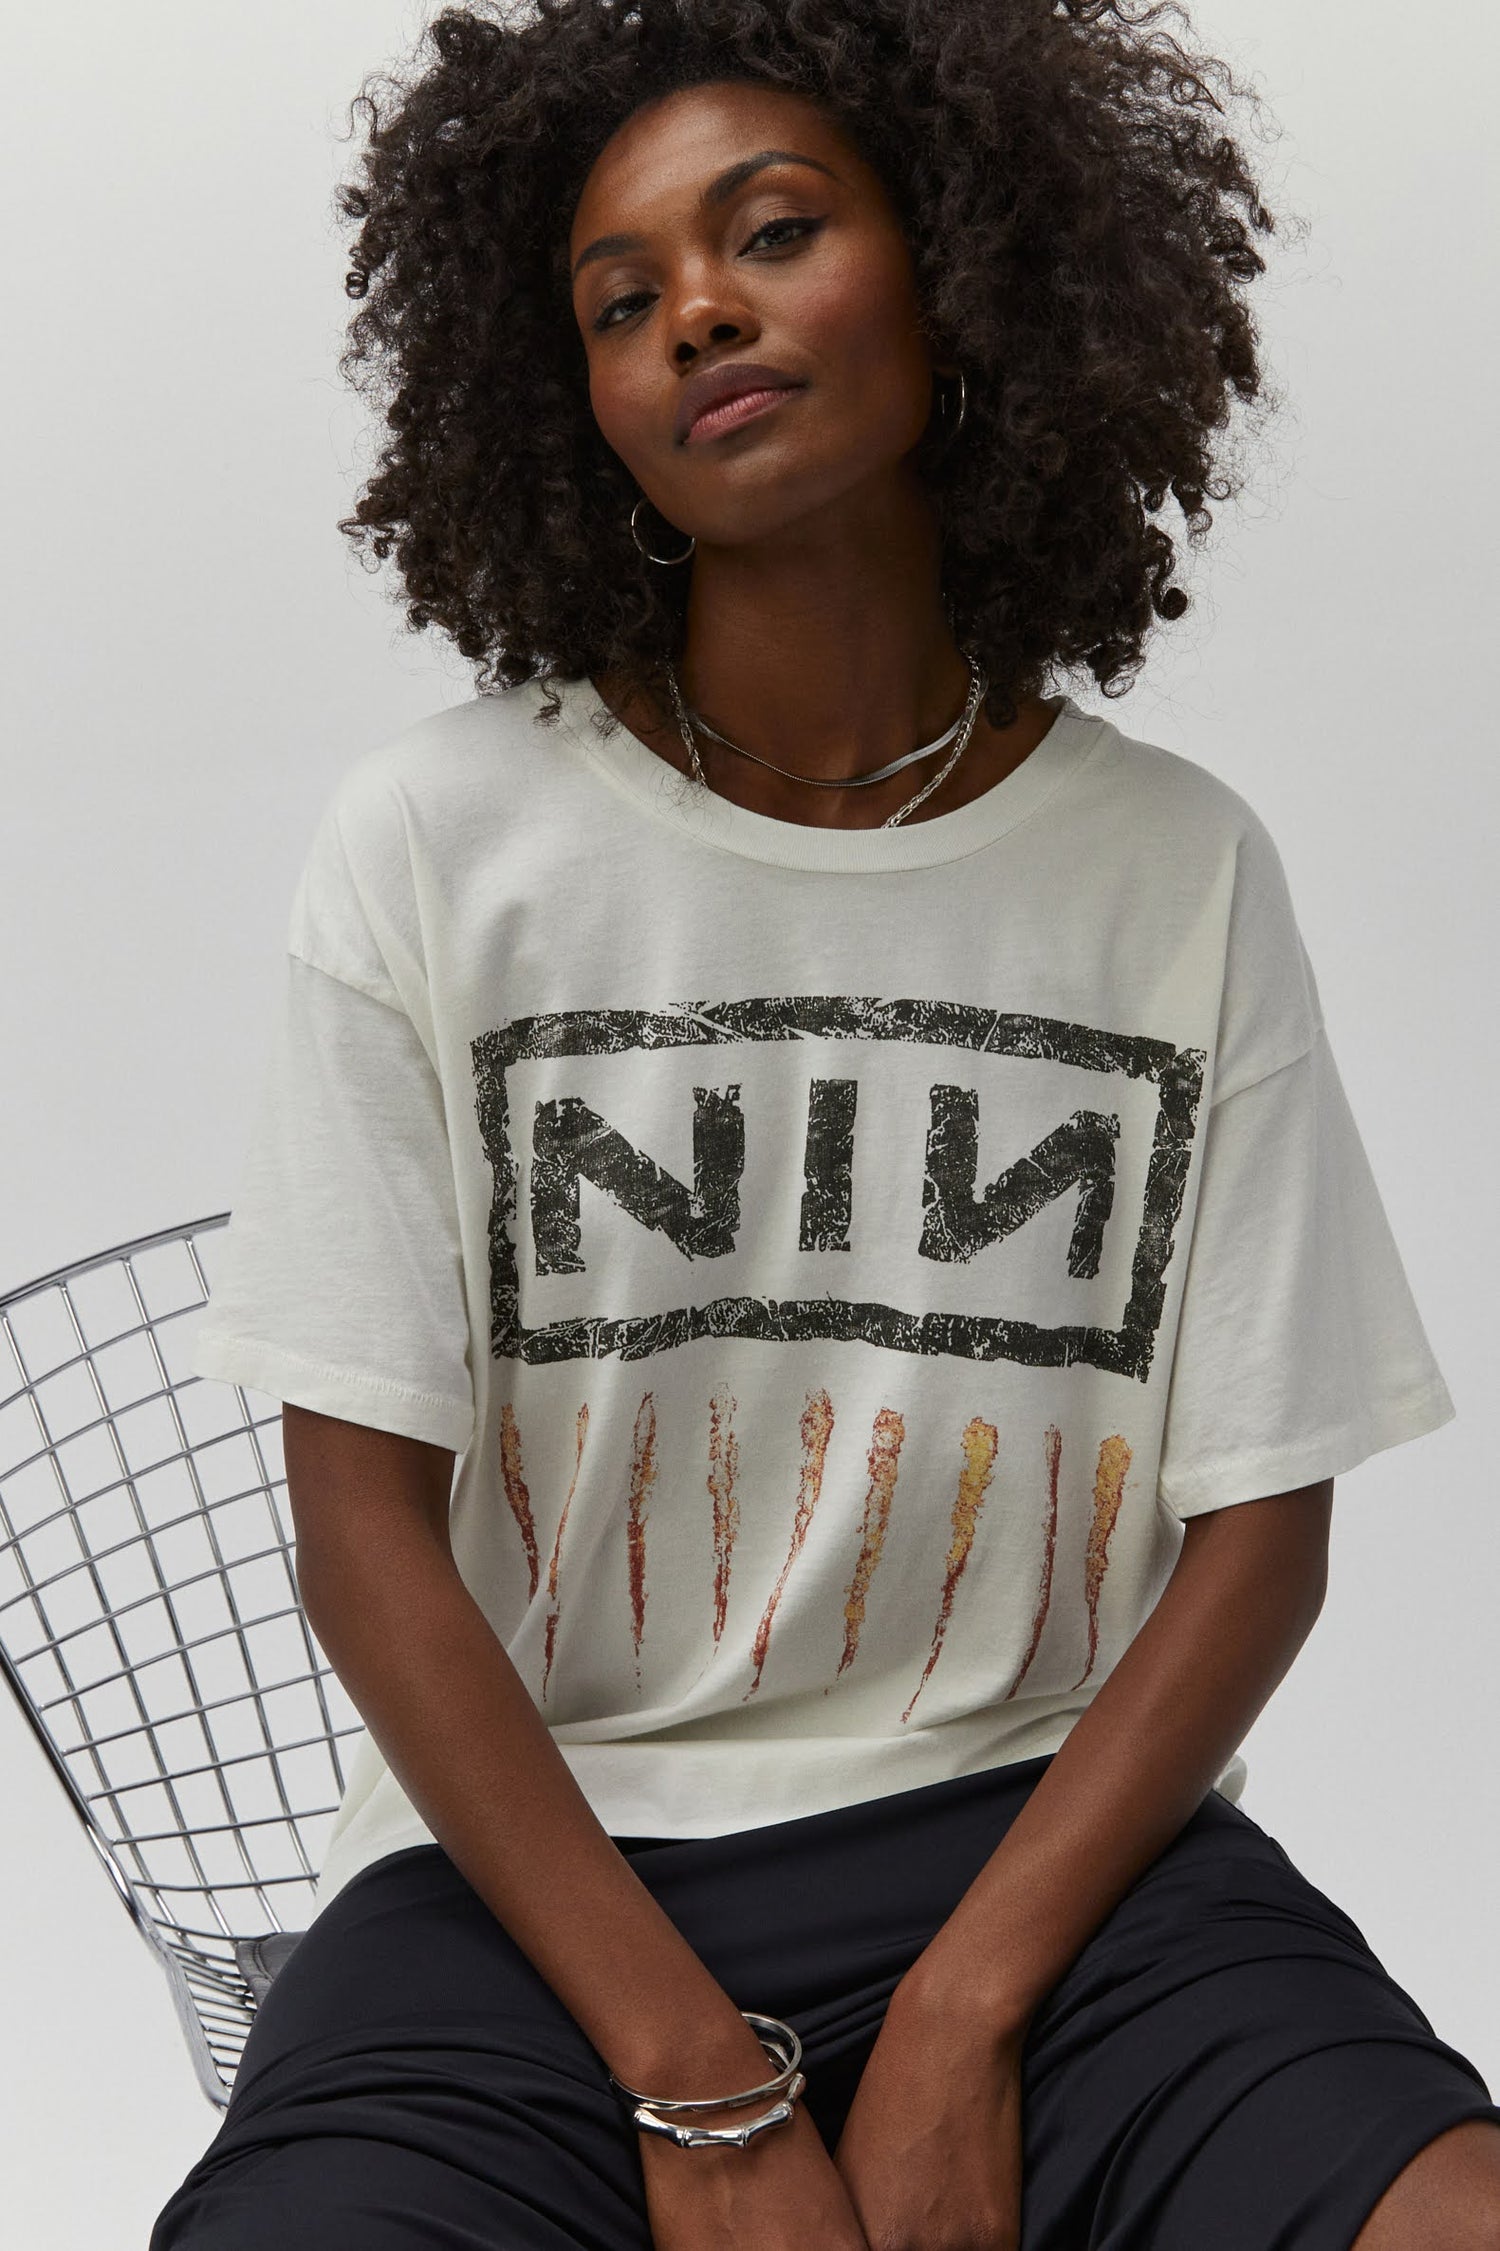 A dark curly-haired model featuring a white tee designed with their logo lands on this roomy merch tee with a tribute to one of the most important albums of the 90s,